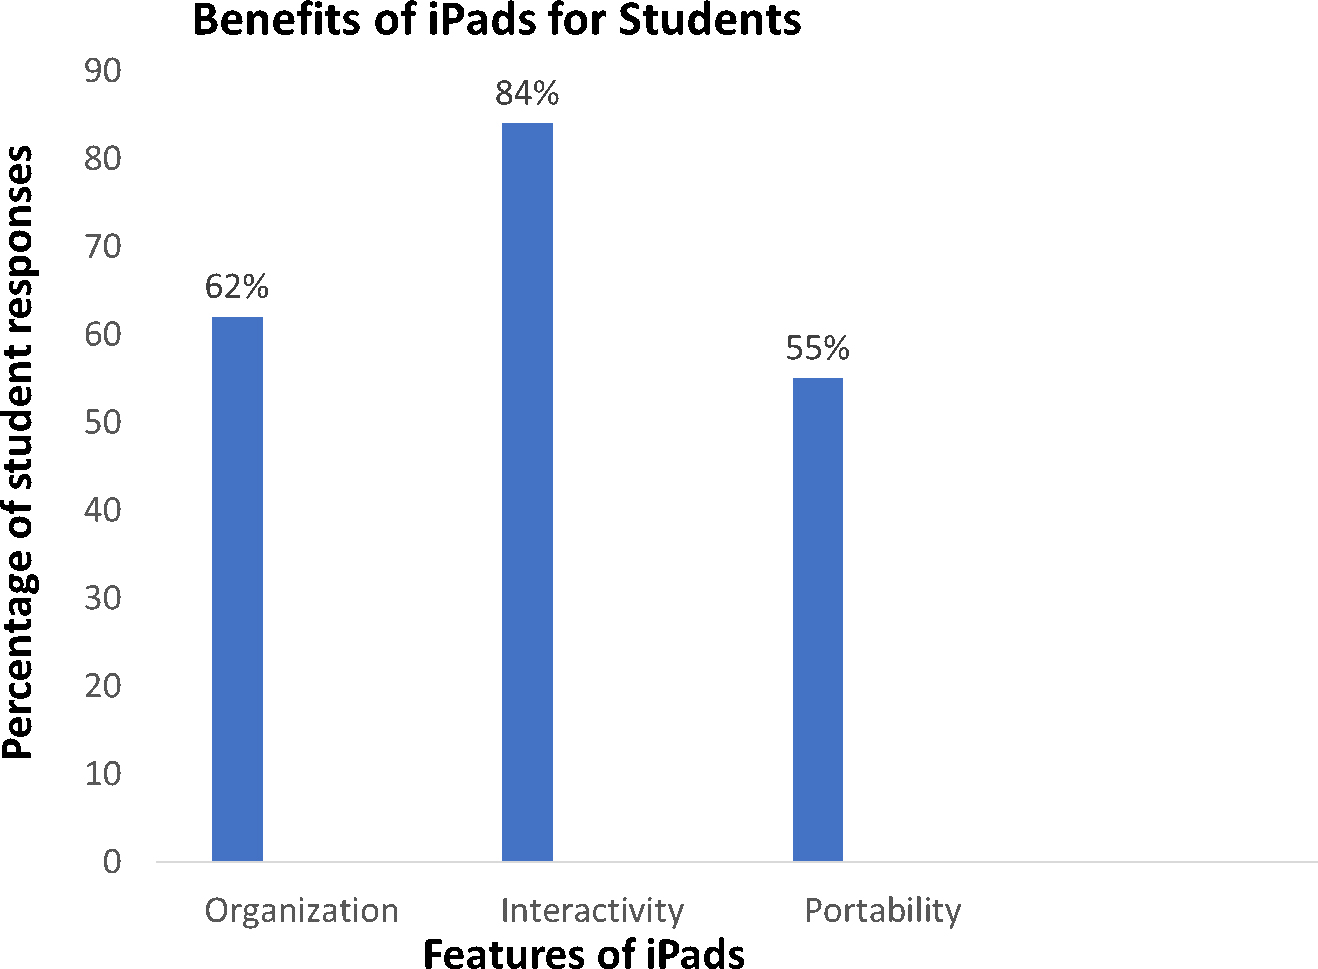 Survey responses on the benefits of iPads for student learning.